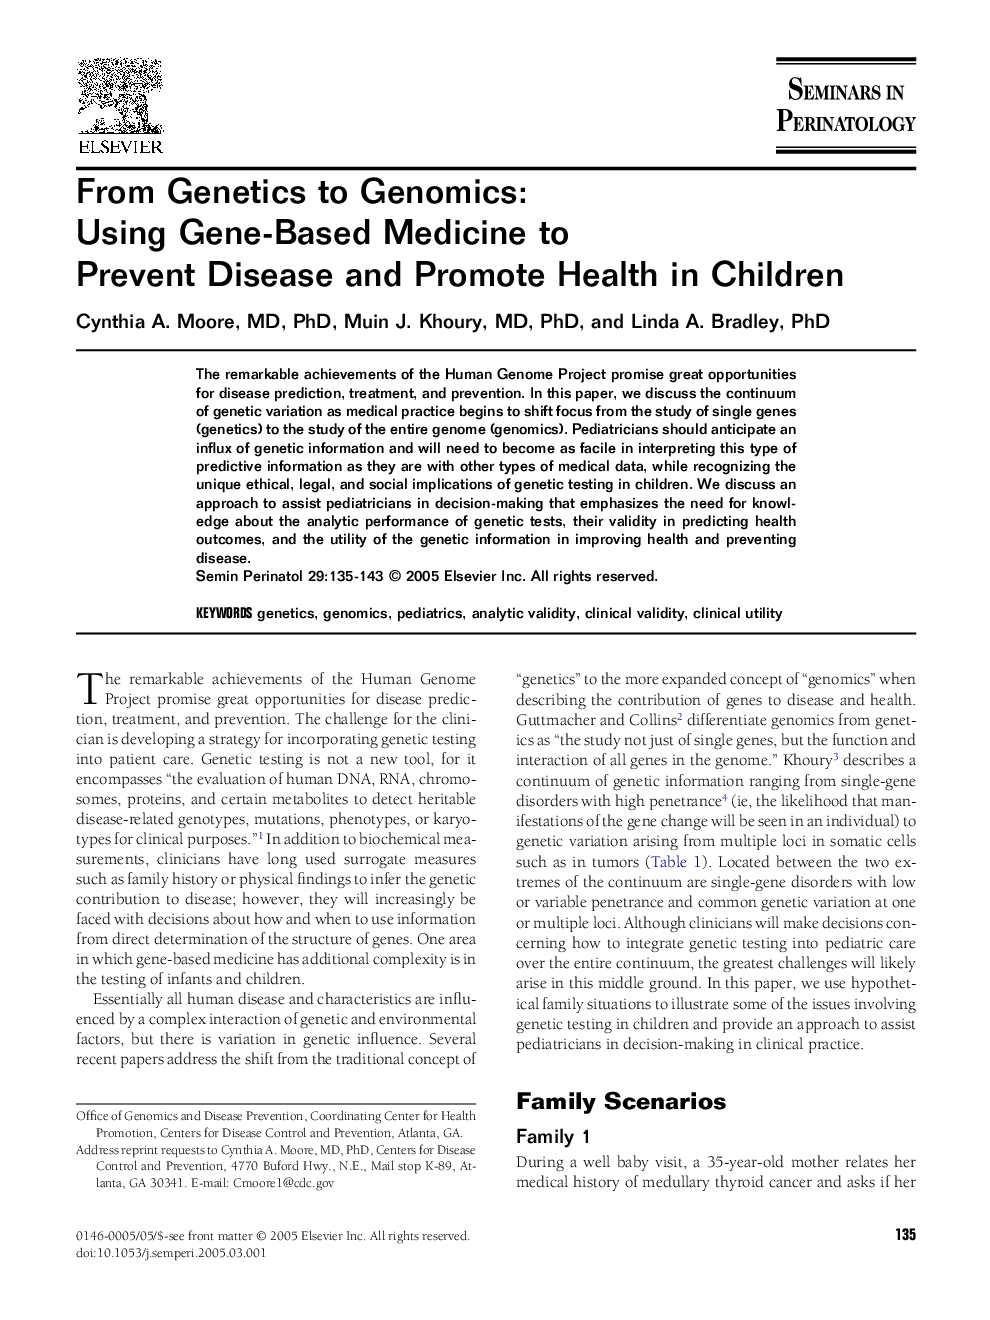 From Genetics to Genomics: Using Gene-Based Medicine to Prevent Disease and Promote Health in Children